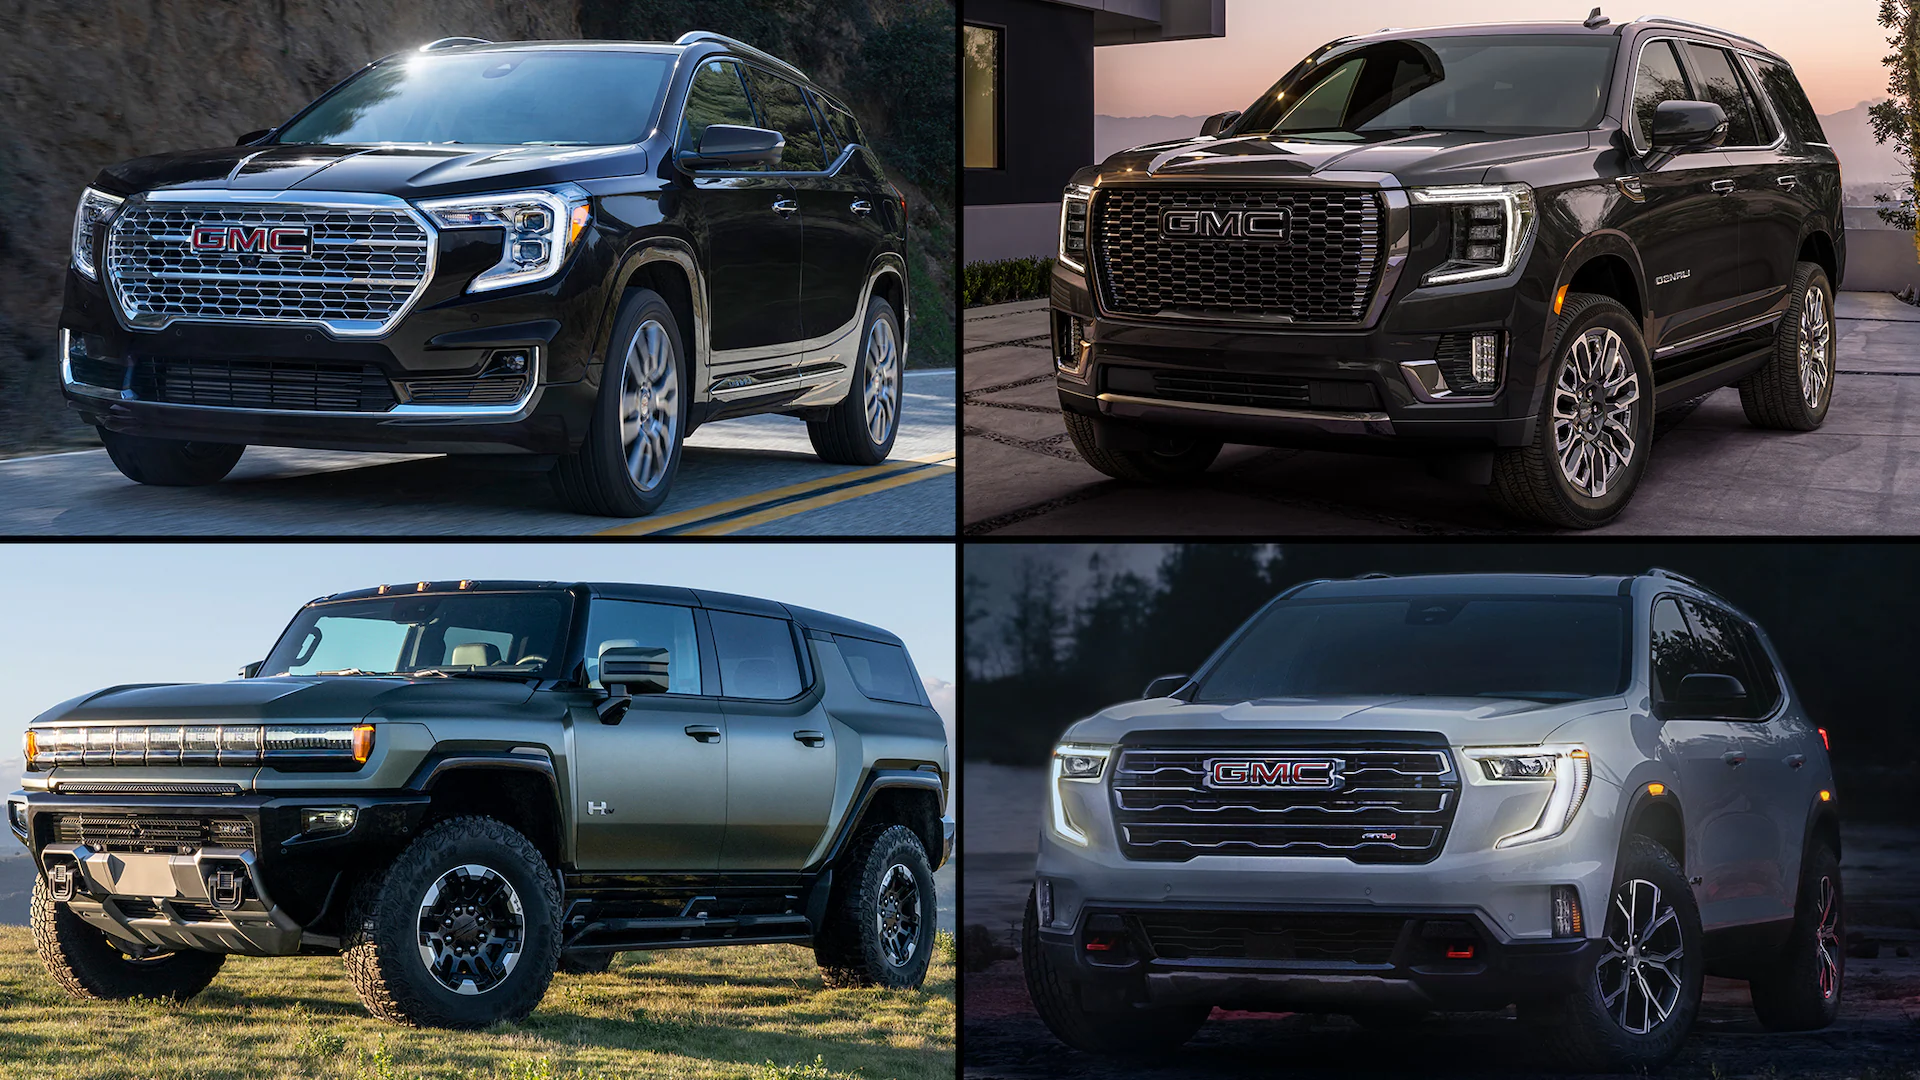 Explore the Rugged and Luxurious GMC SUV Lineup in India